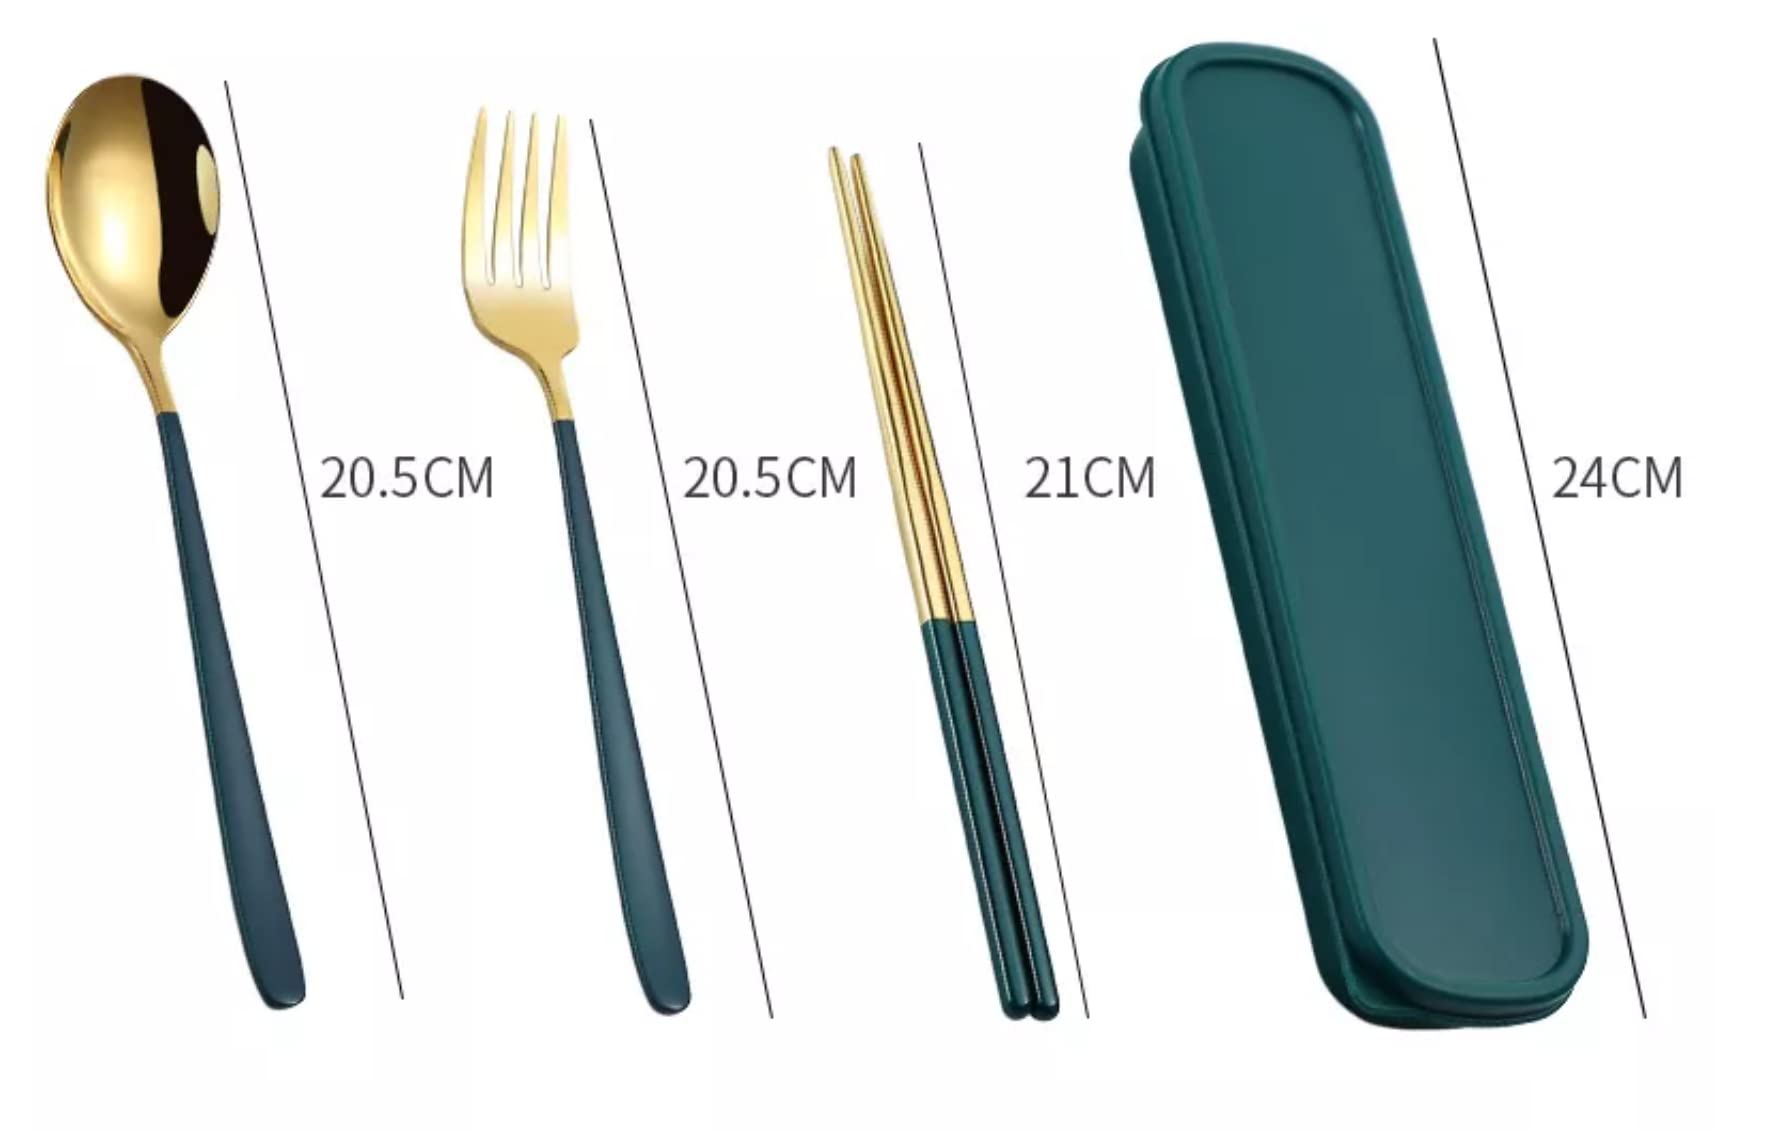 Travel Stainless Steel Utensils - Spoon Fork & Chopsticks with Box - Portable Active